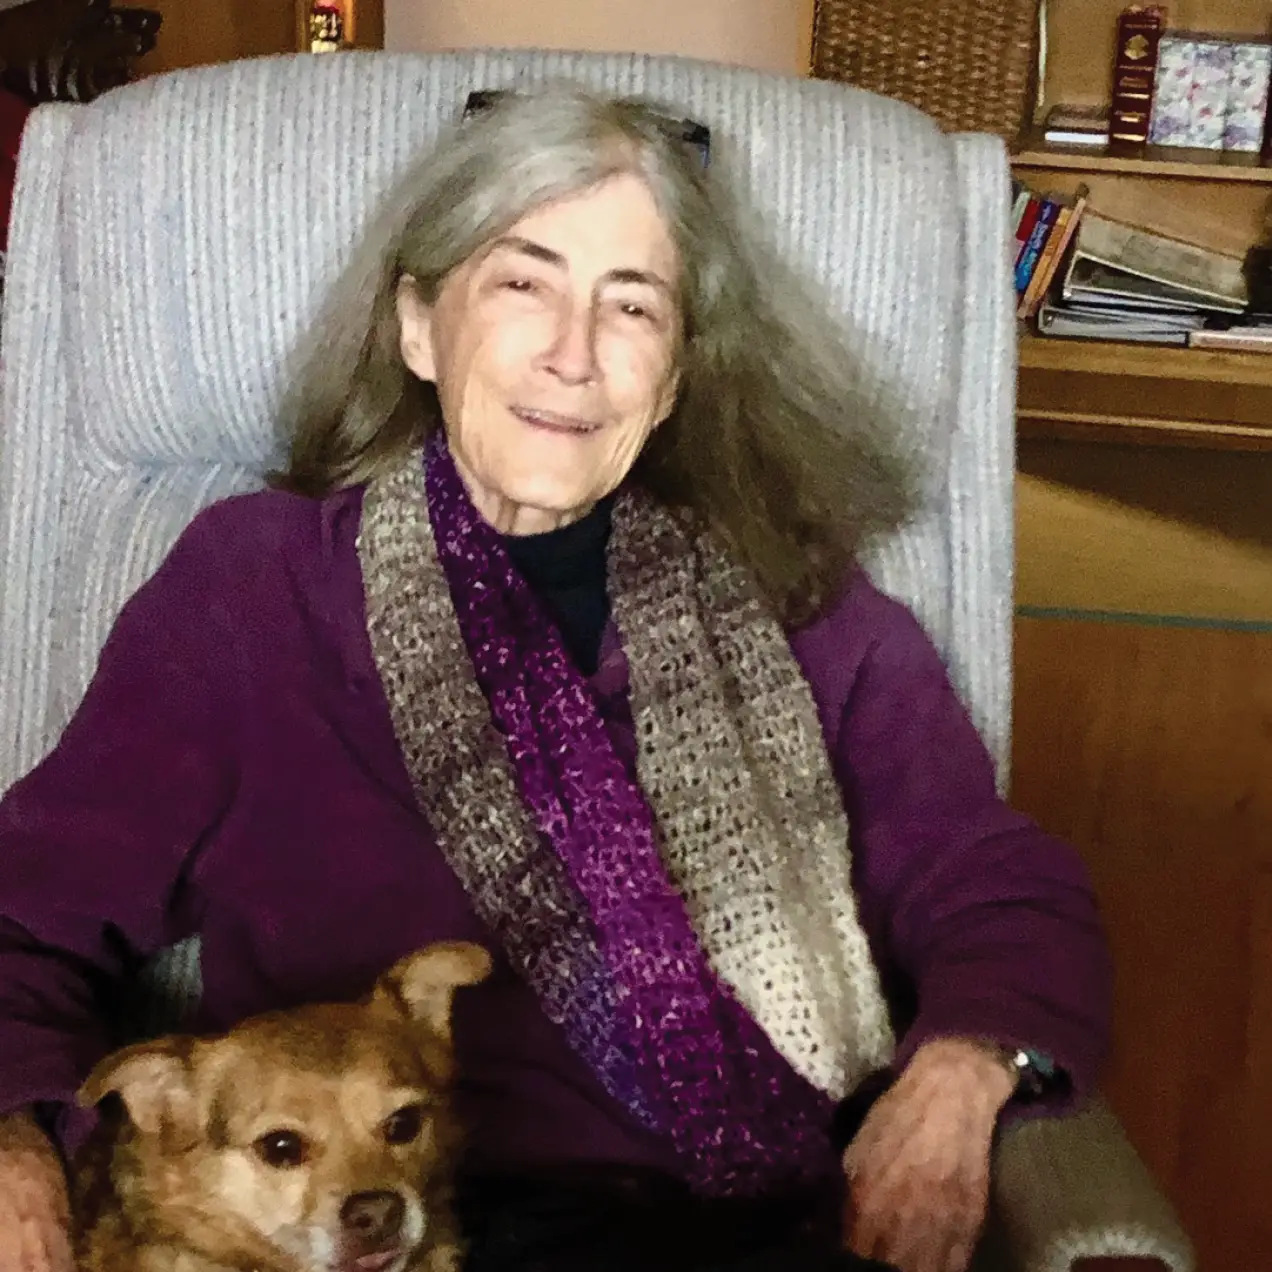 Merrill How Leavitt smiling and seated with dog in chair